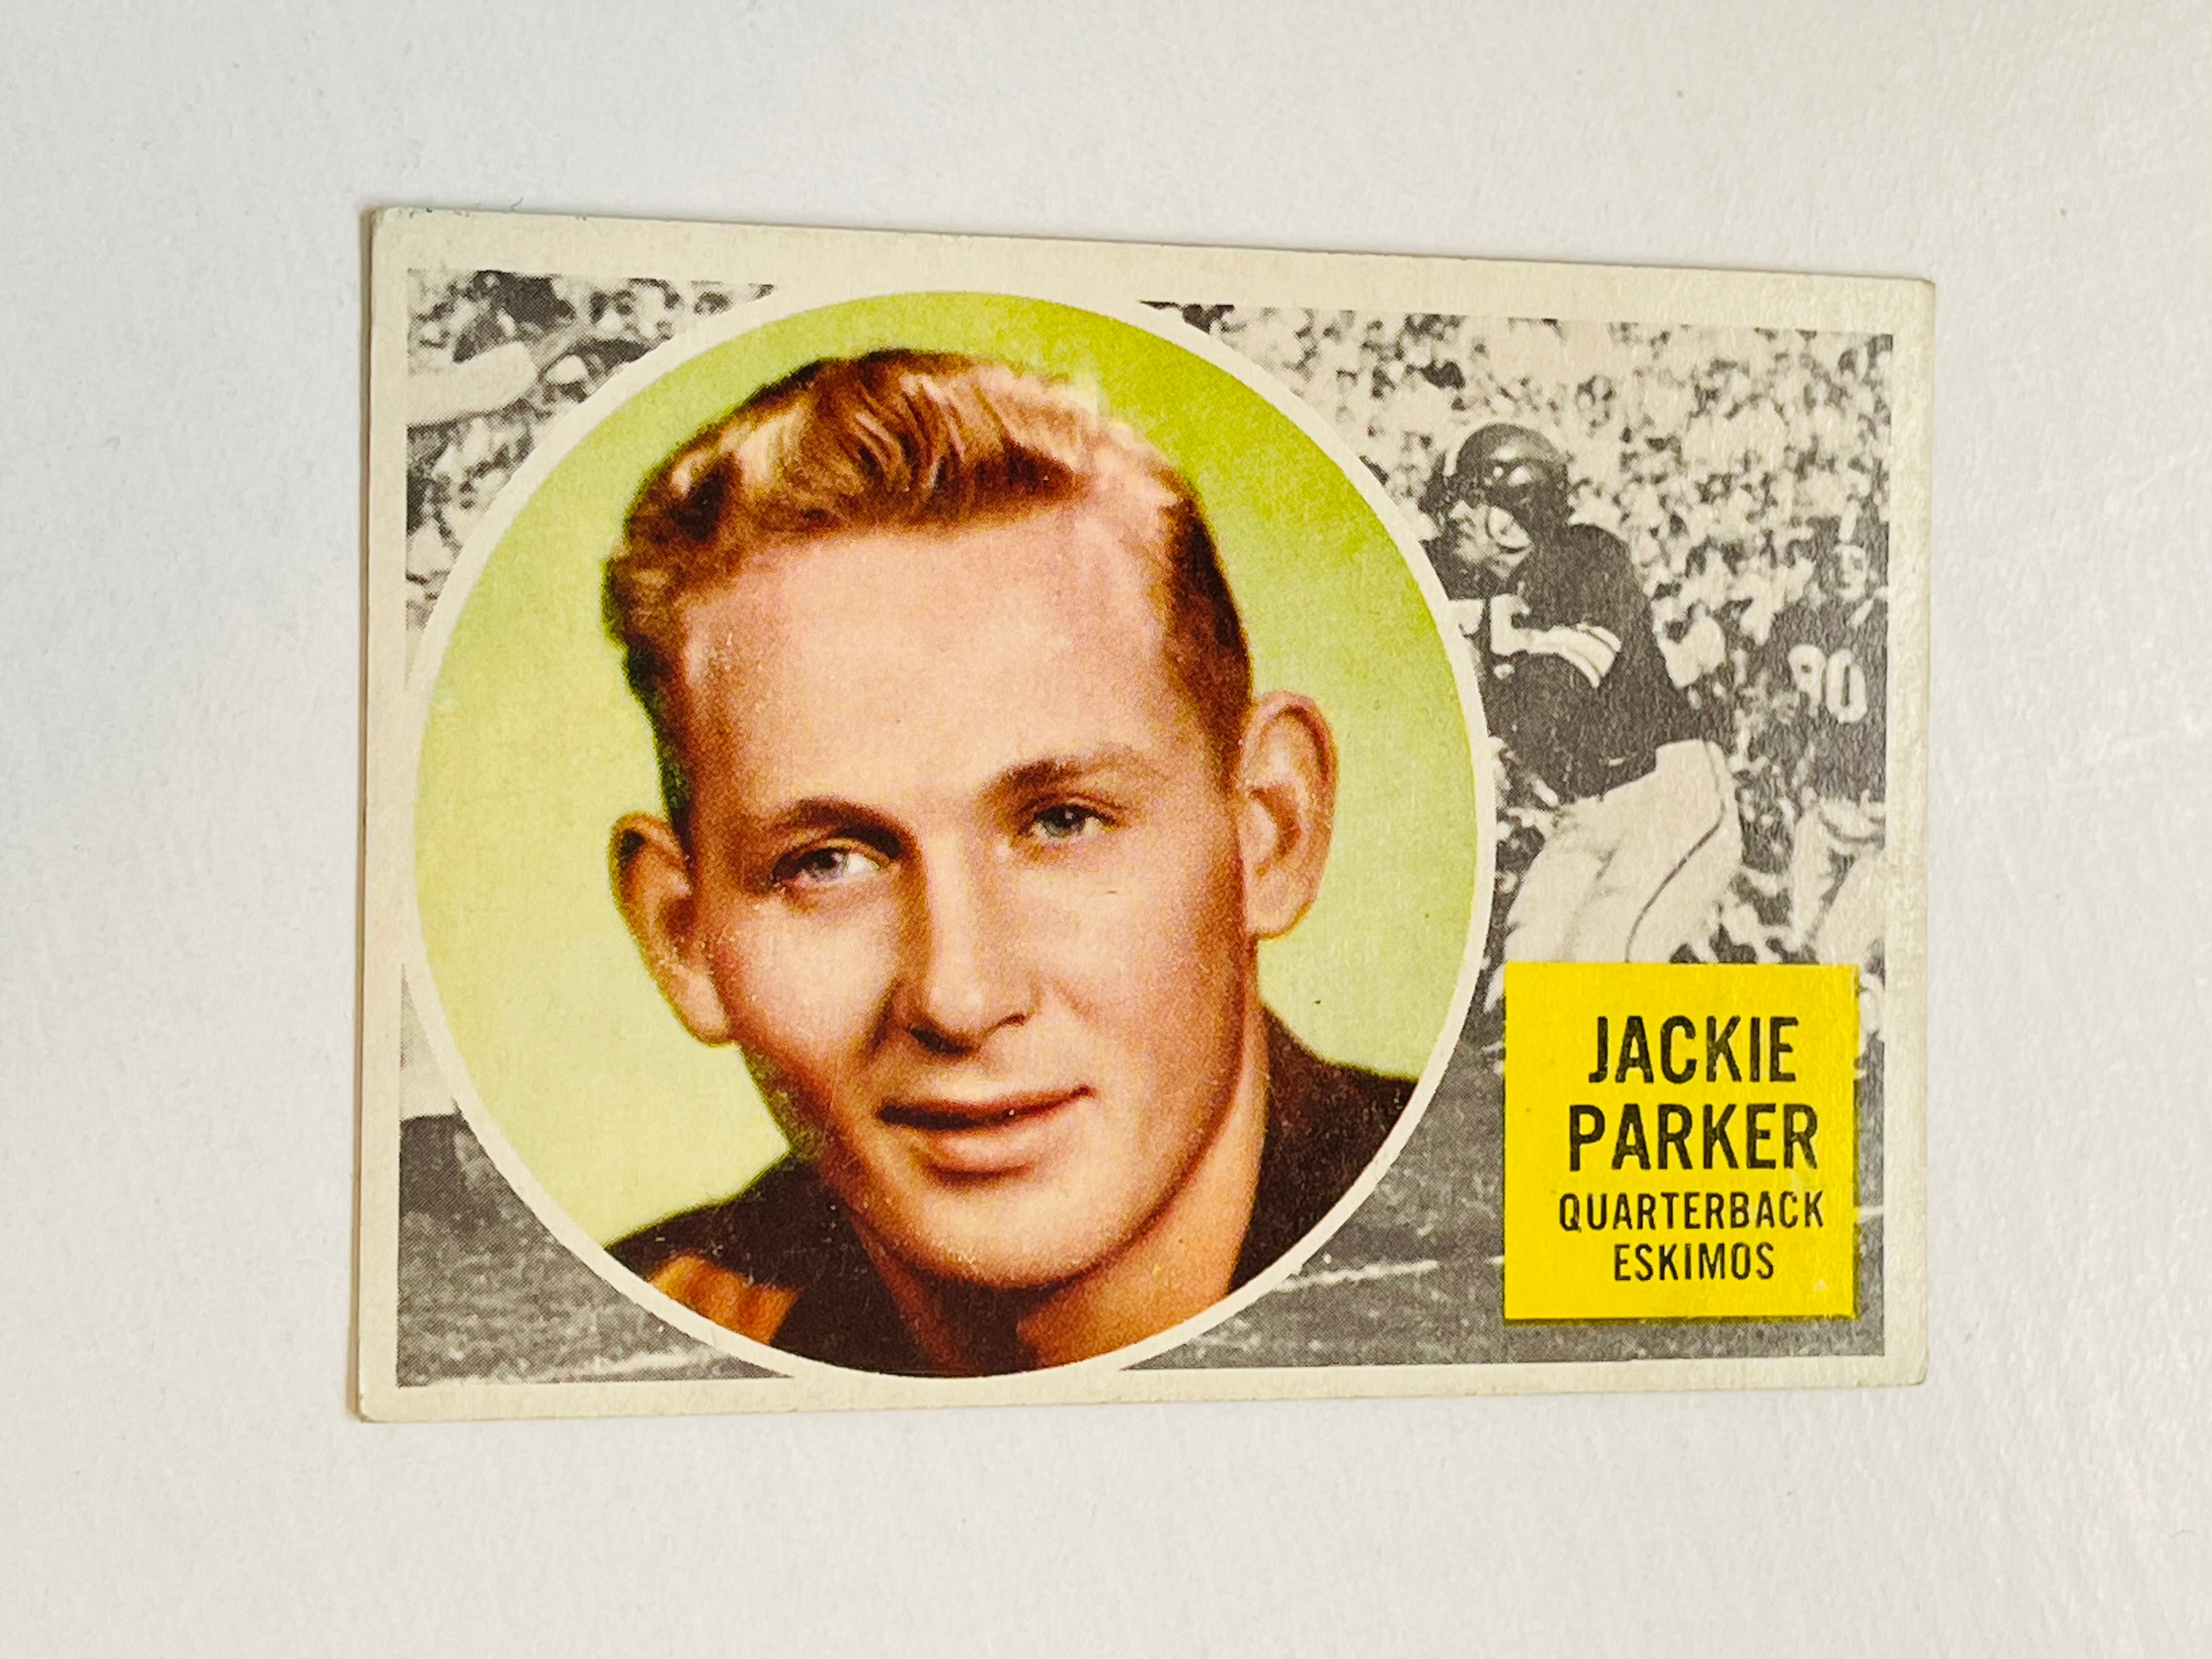 Jackie Parker CFL Topps football card 1960